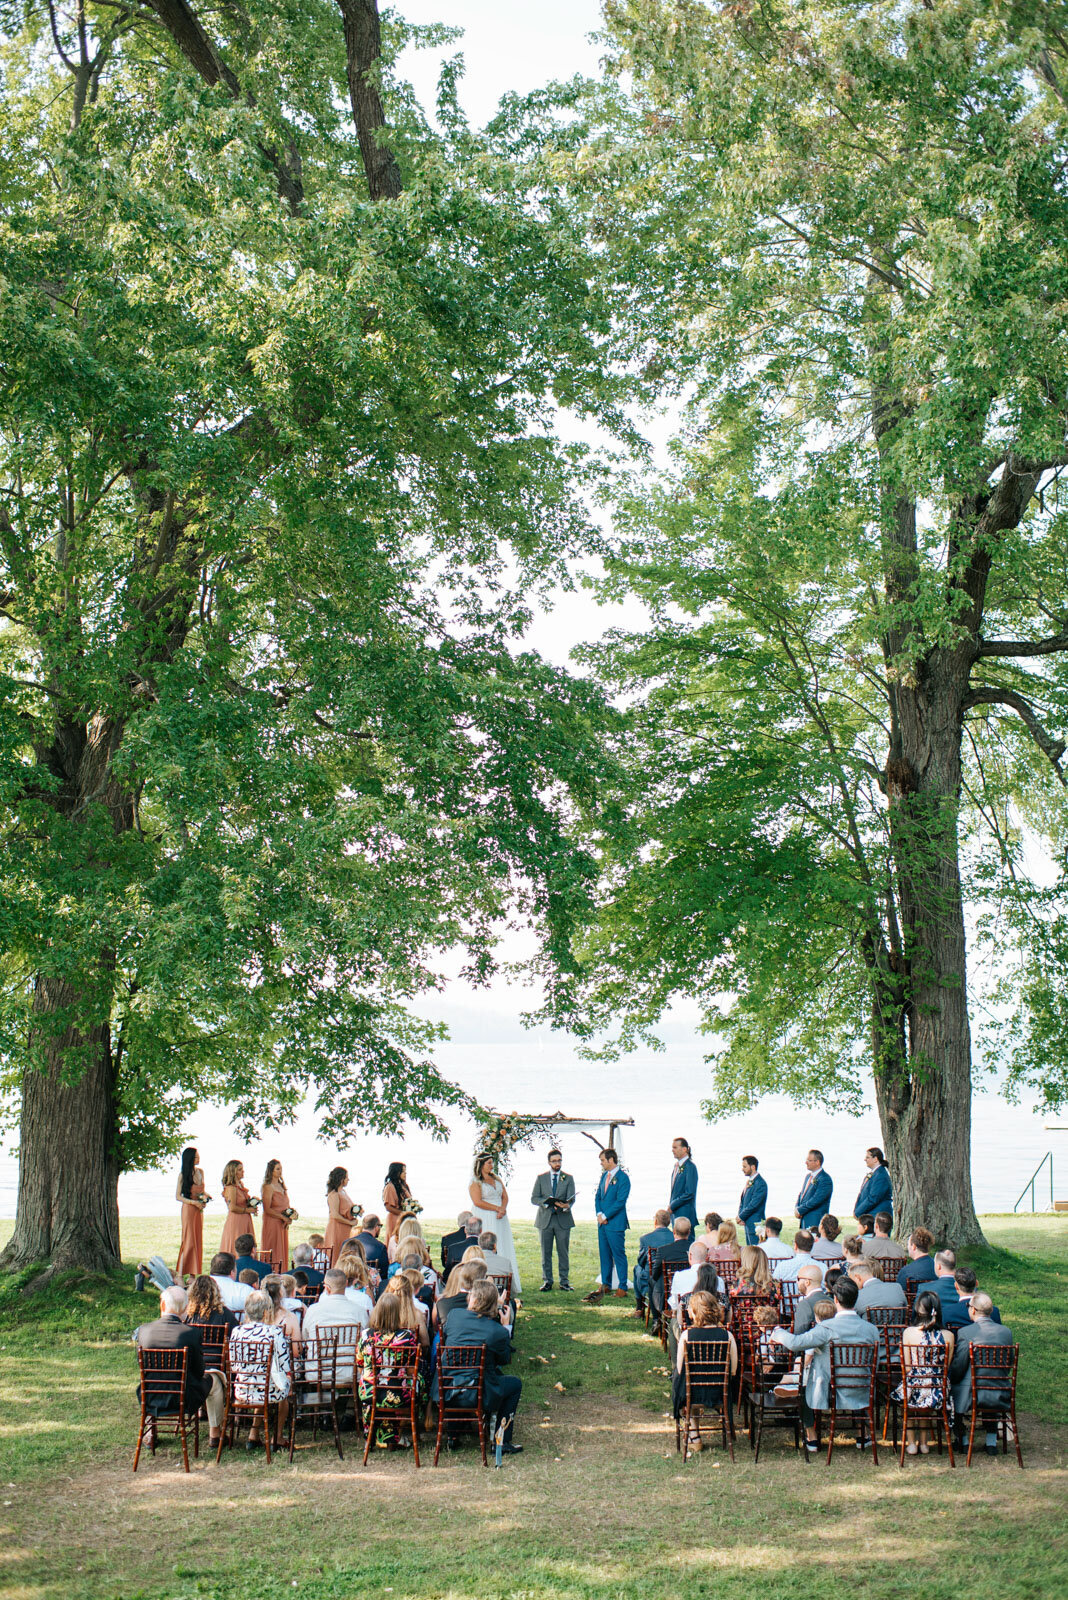 microwedding ceremony at lake bomoseen lodge under trees in vermont